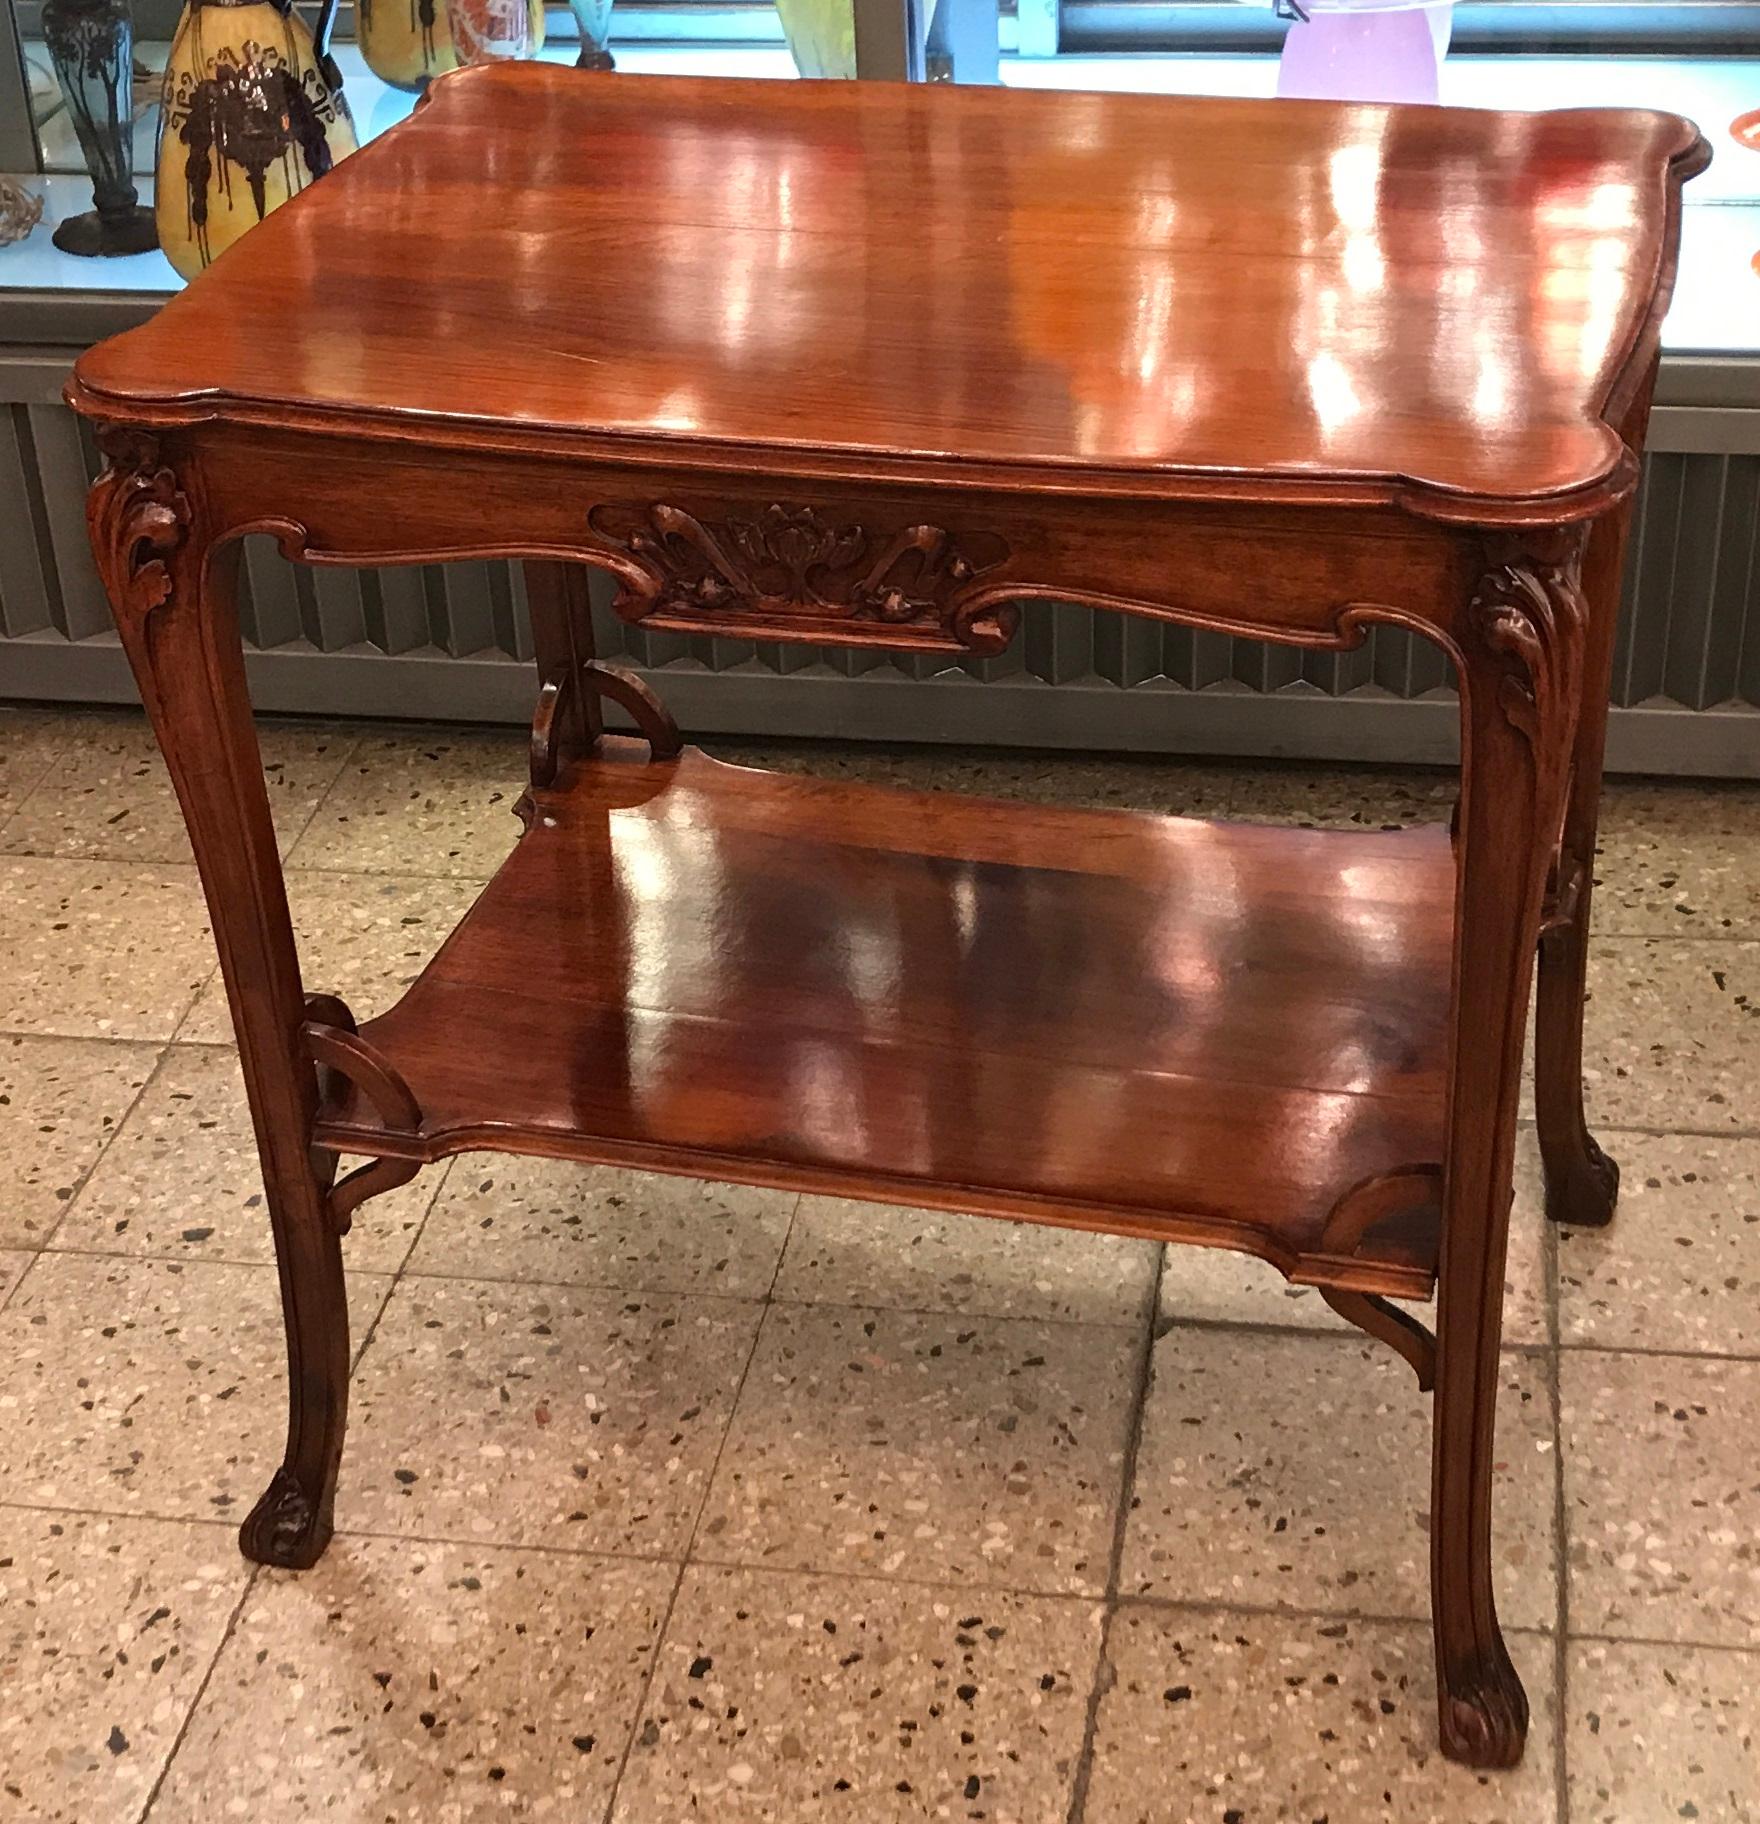 Incredible Art Nouveau table. With the original label, from Siegfried Bing's or Samuel Bing shop.

We have specialized in the sale of Art Deco and Art Nouveau and Vintage styles since 1982. If you have any questions we are at your disposal.
Pushing